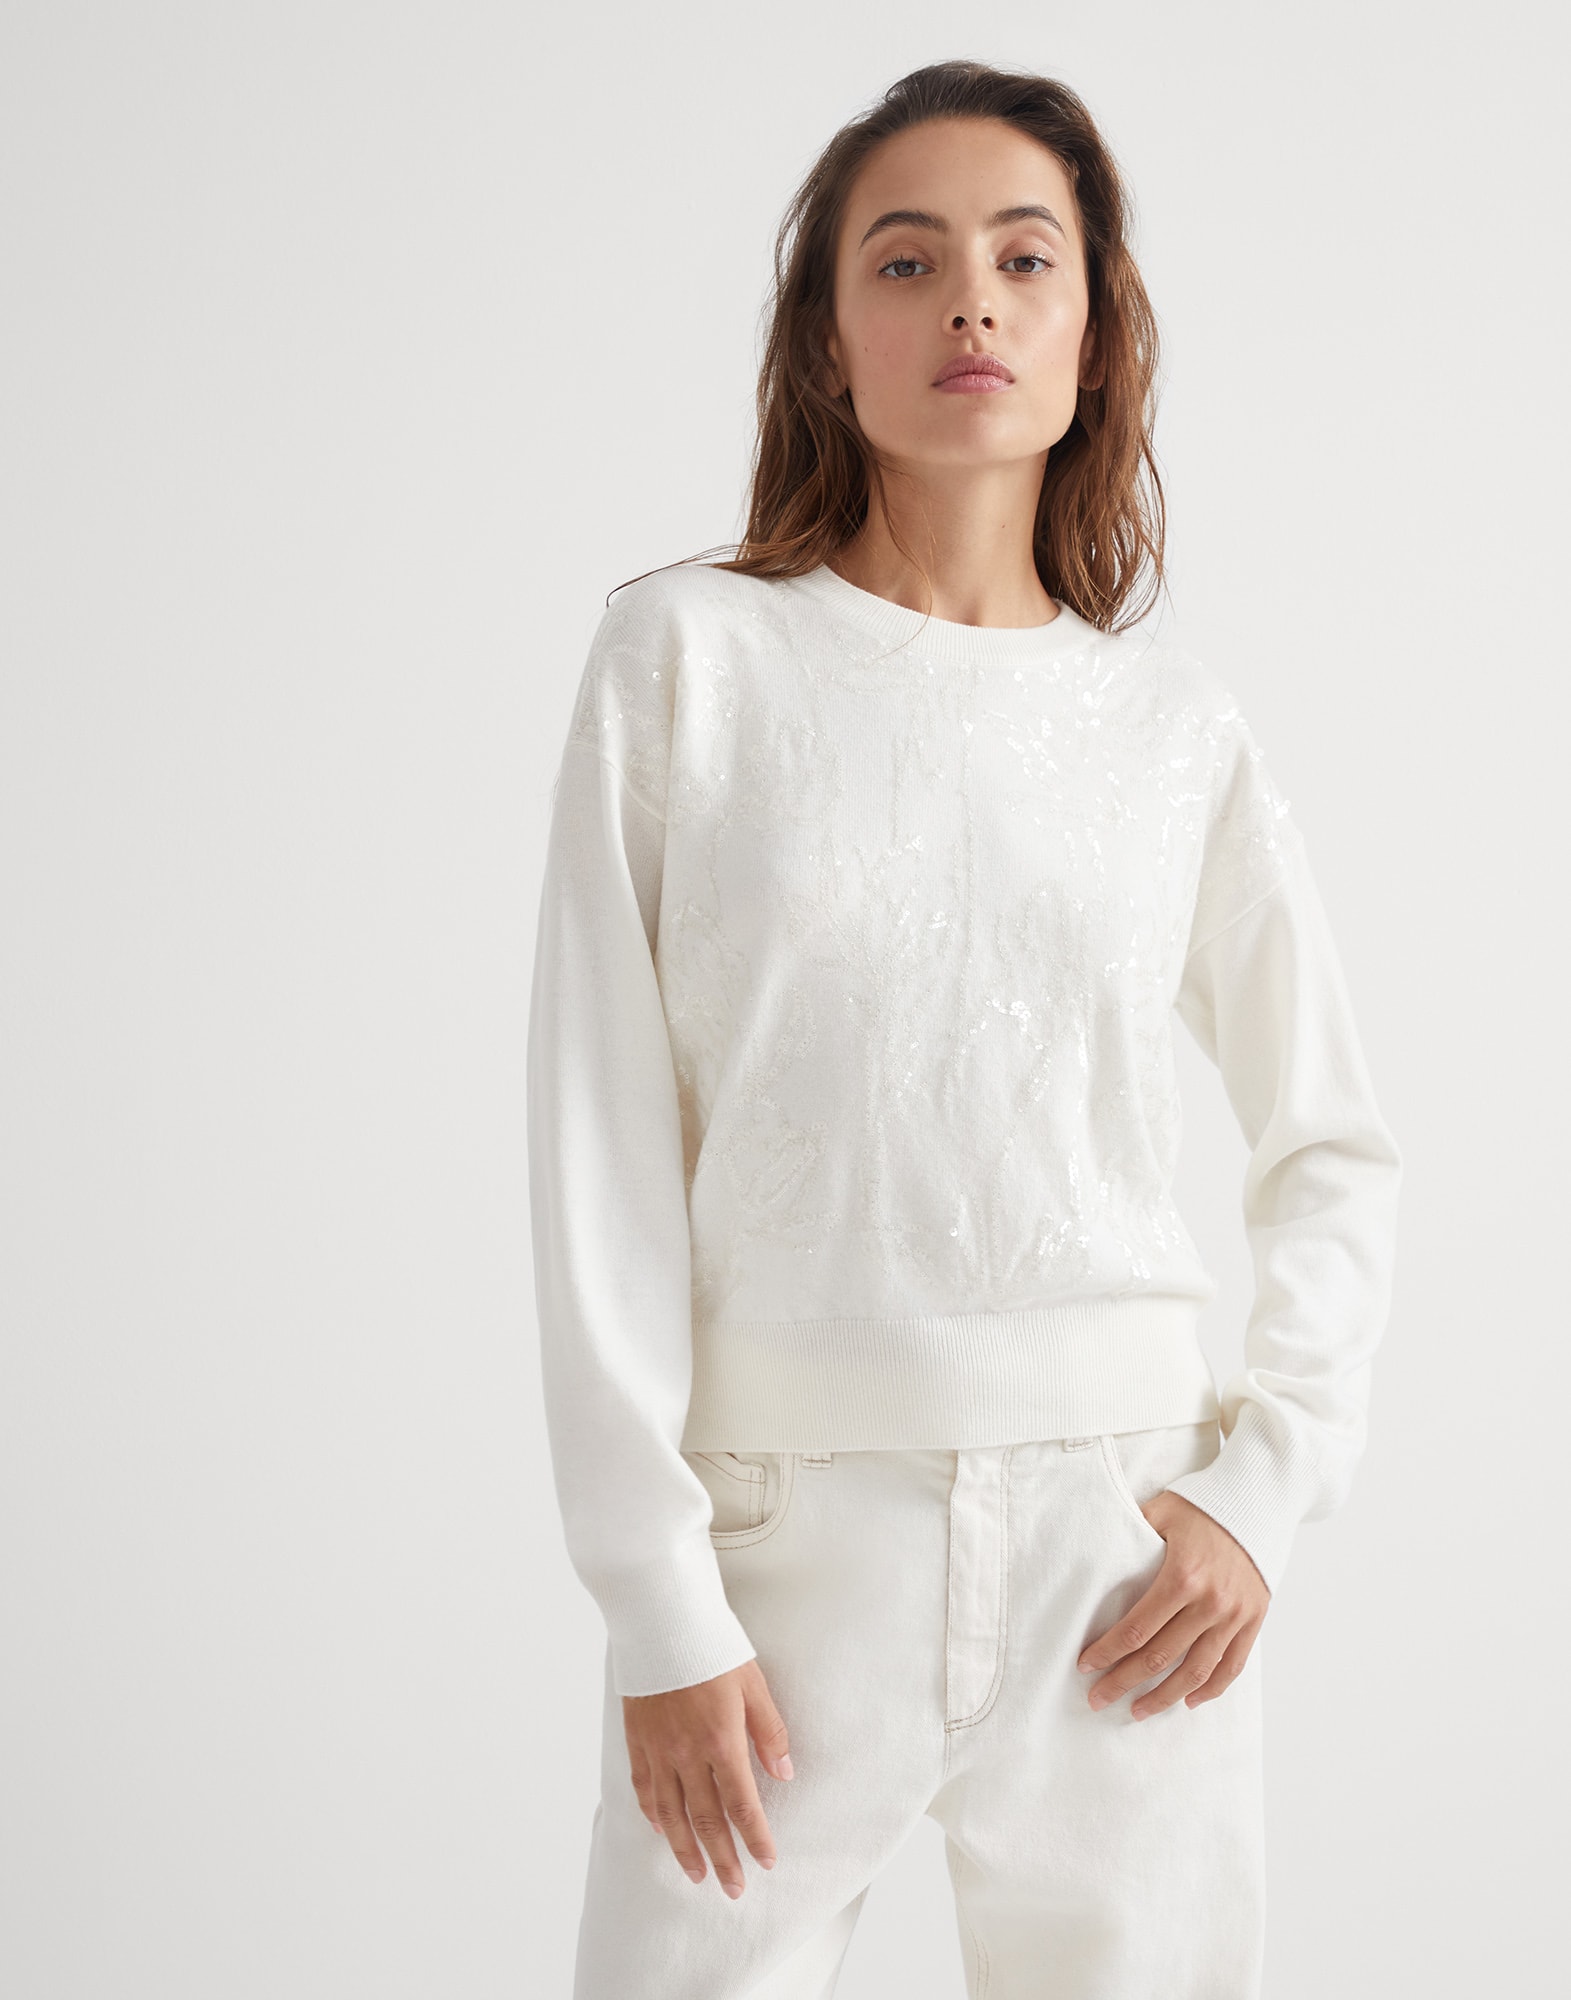 Sweater with Dazzling Embroidery